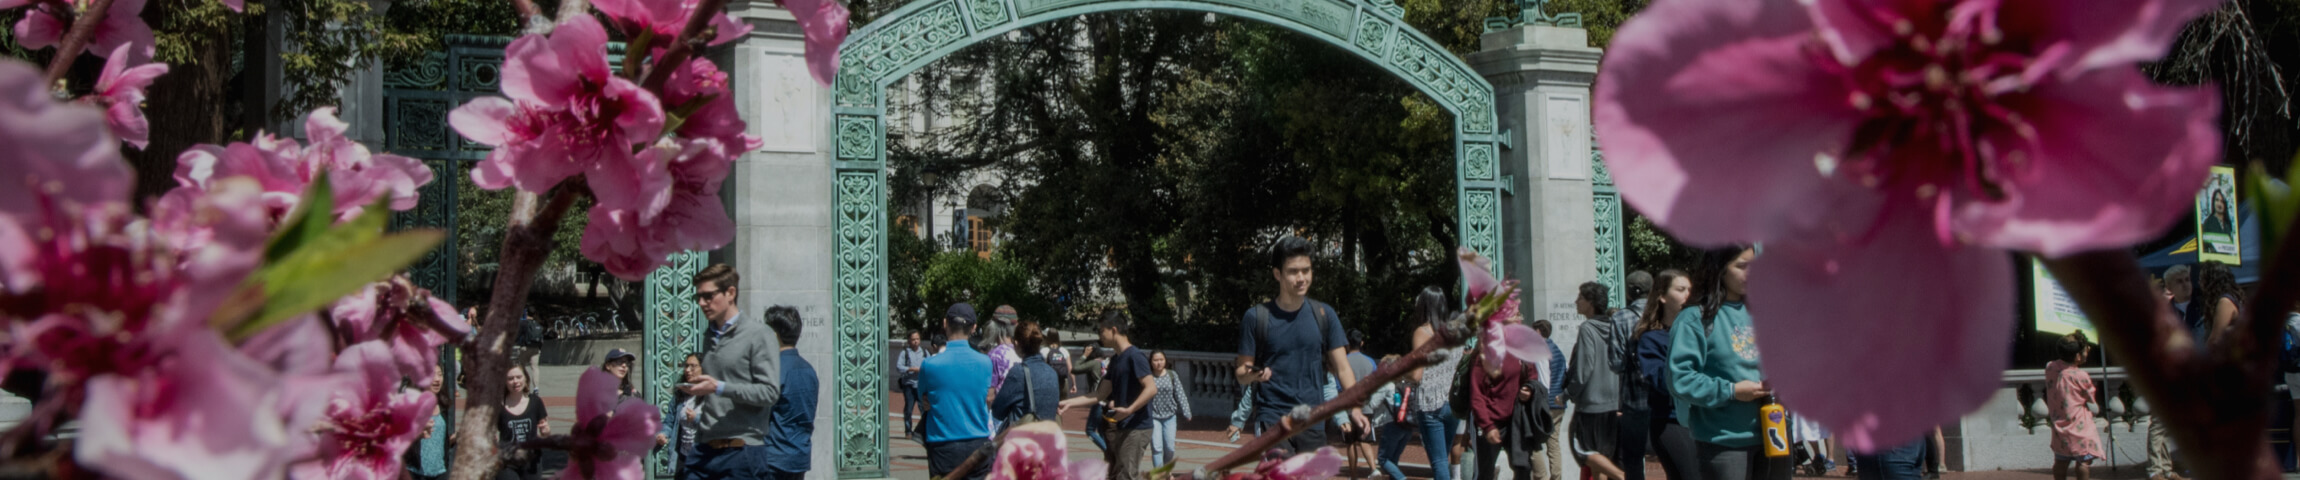 Sather Gate at UC Berkeley with a lot of students walking around, and pink flowers